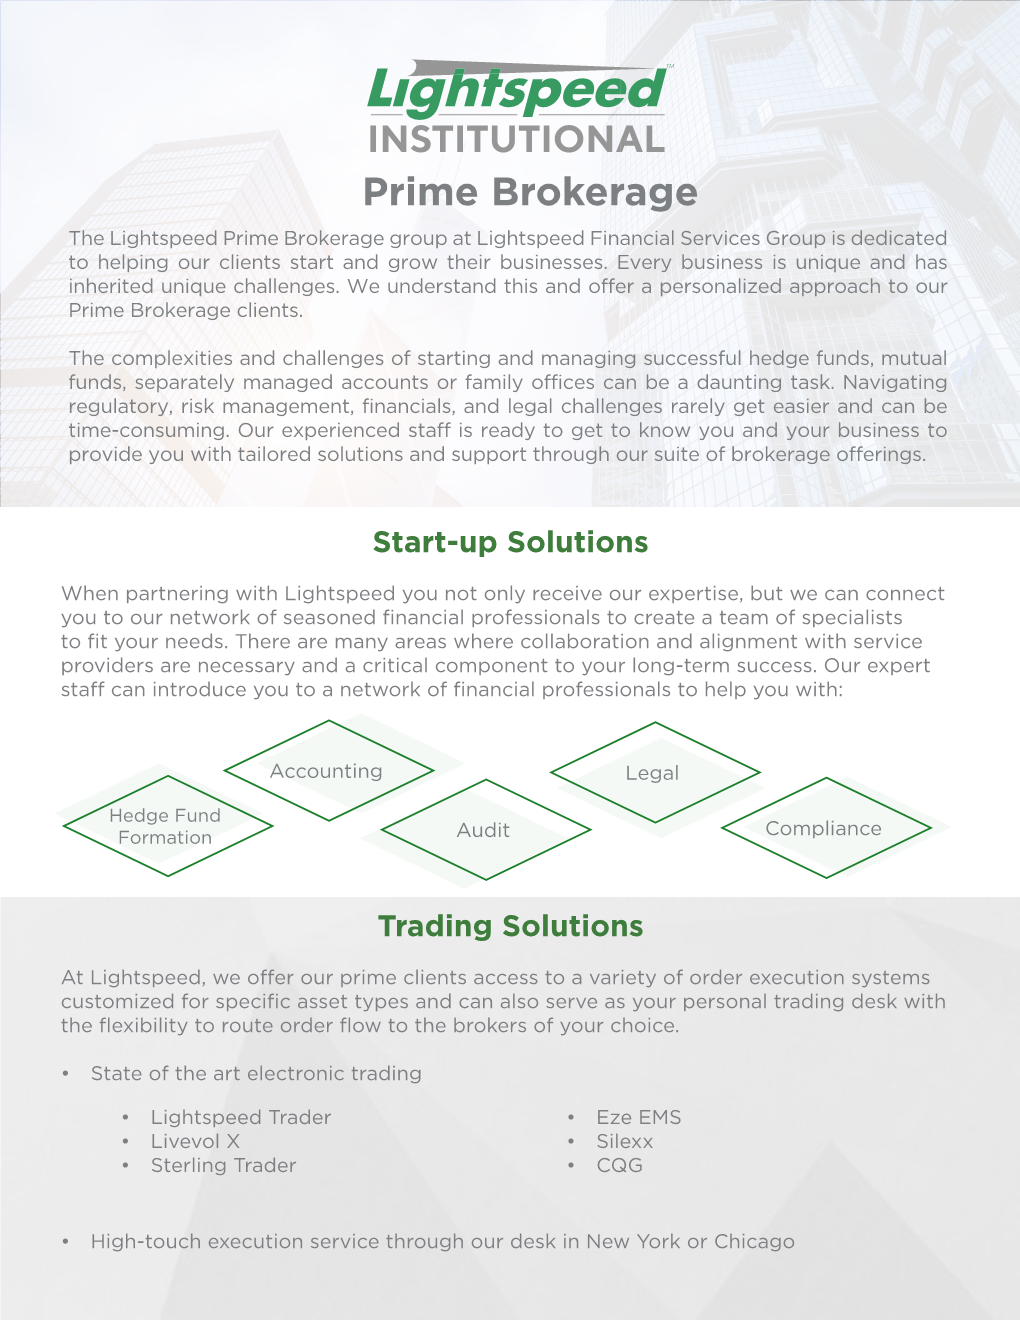 Prime Brokerage the Lightspeed Prime Brokerage Group at Lightspeed Financial Services Group Is Dedicated to Helping Our Clients Start and Grow Their Businesses